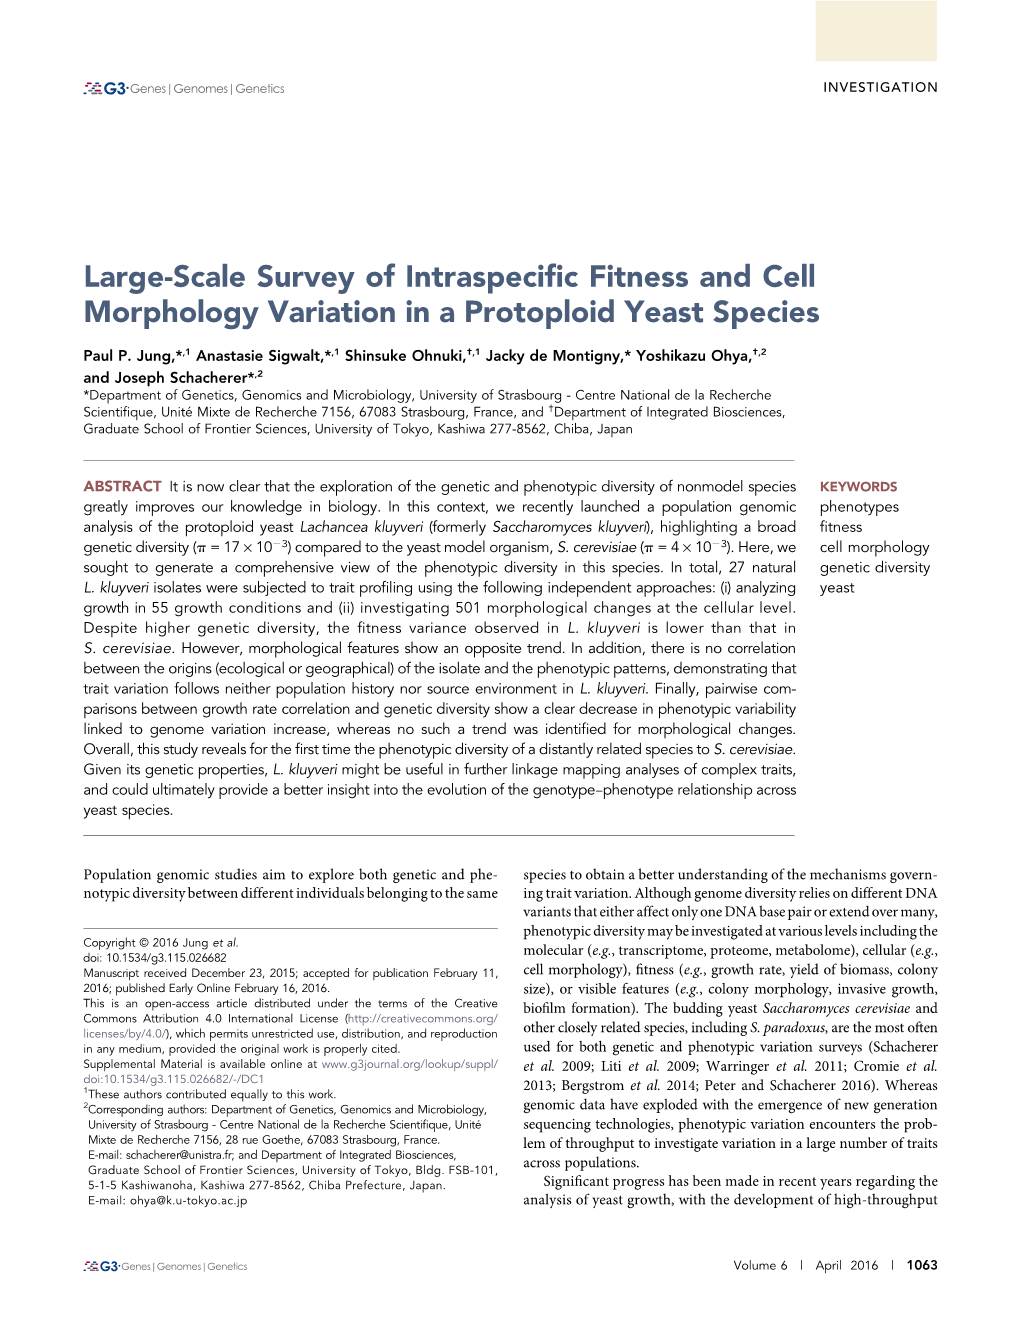 Large-Scale Survey of Intraspecific Fitness and Cell Morphology Variation in a Protoploid Yeast Species